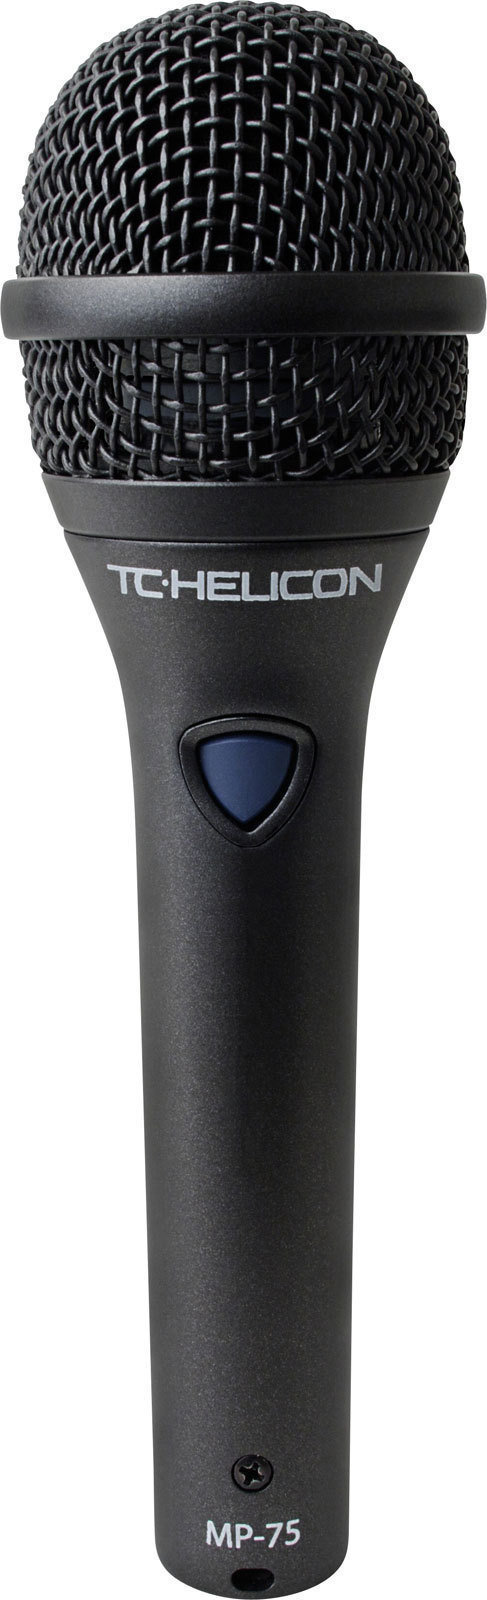 Vocal Dynamic Microphone TC Helicon MP-75 Vocal Dynamic Microphone